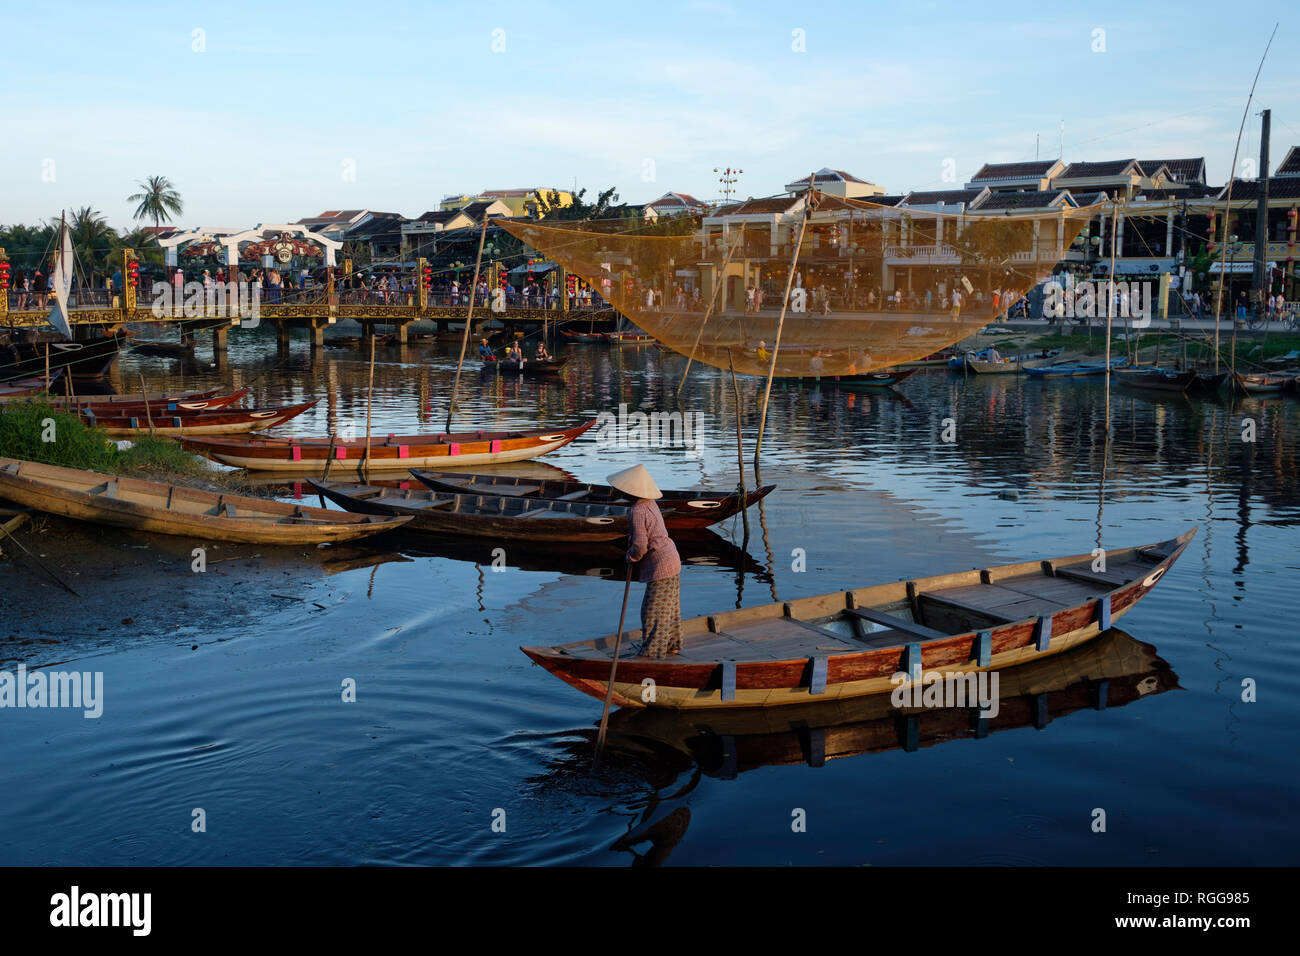 Boats and fishing net on the Thu Bon river in Hoi An, Vietnam Stock Photo